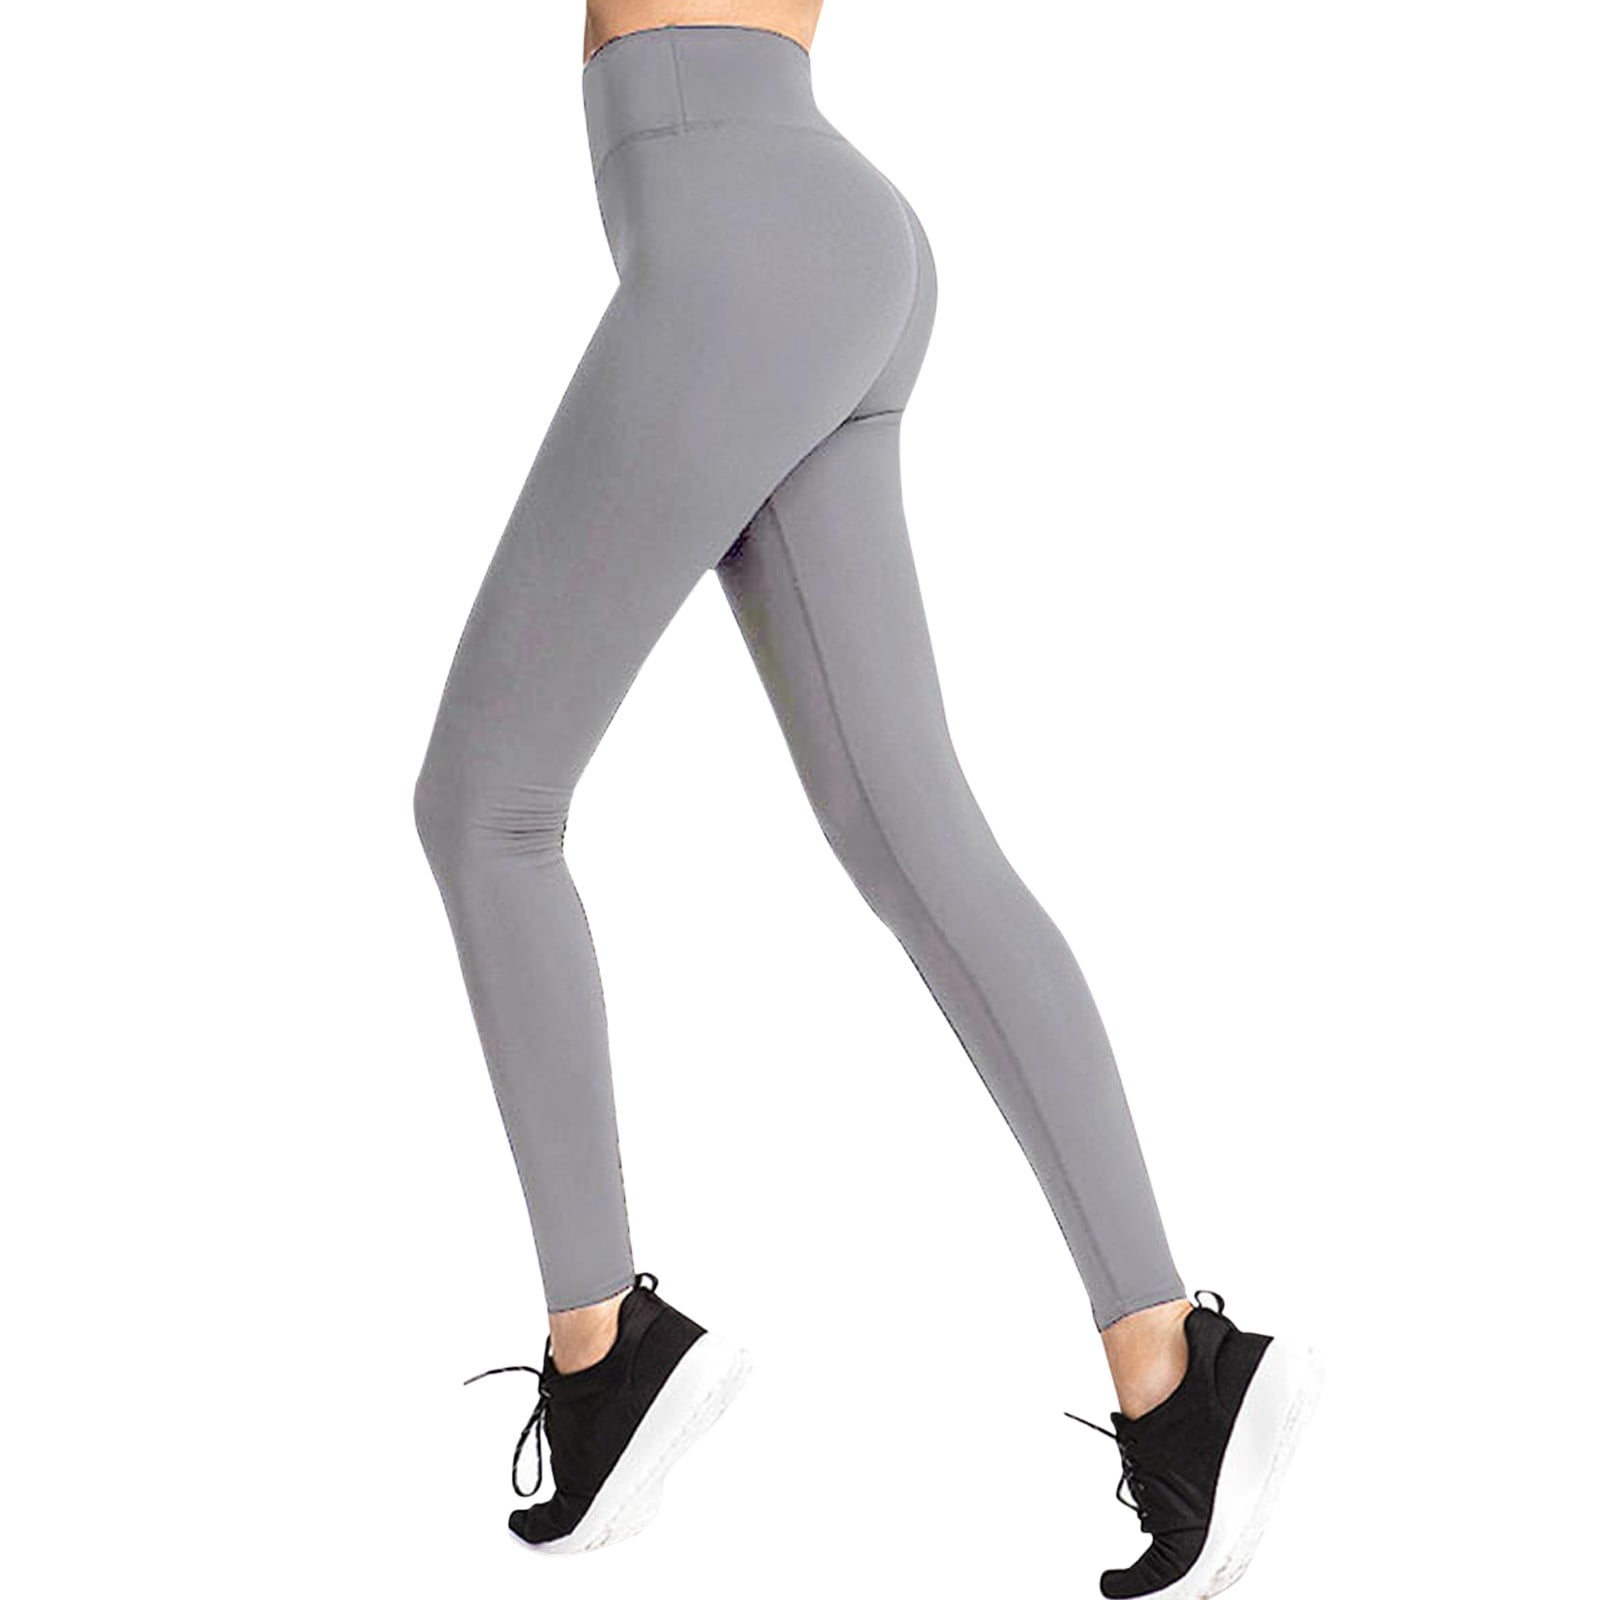 kpoplk Bootcut Yoga Pants For Women,Crossover Leggings with